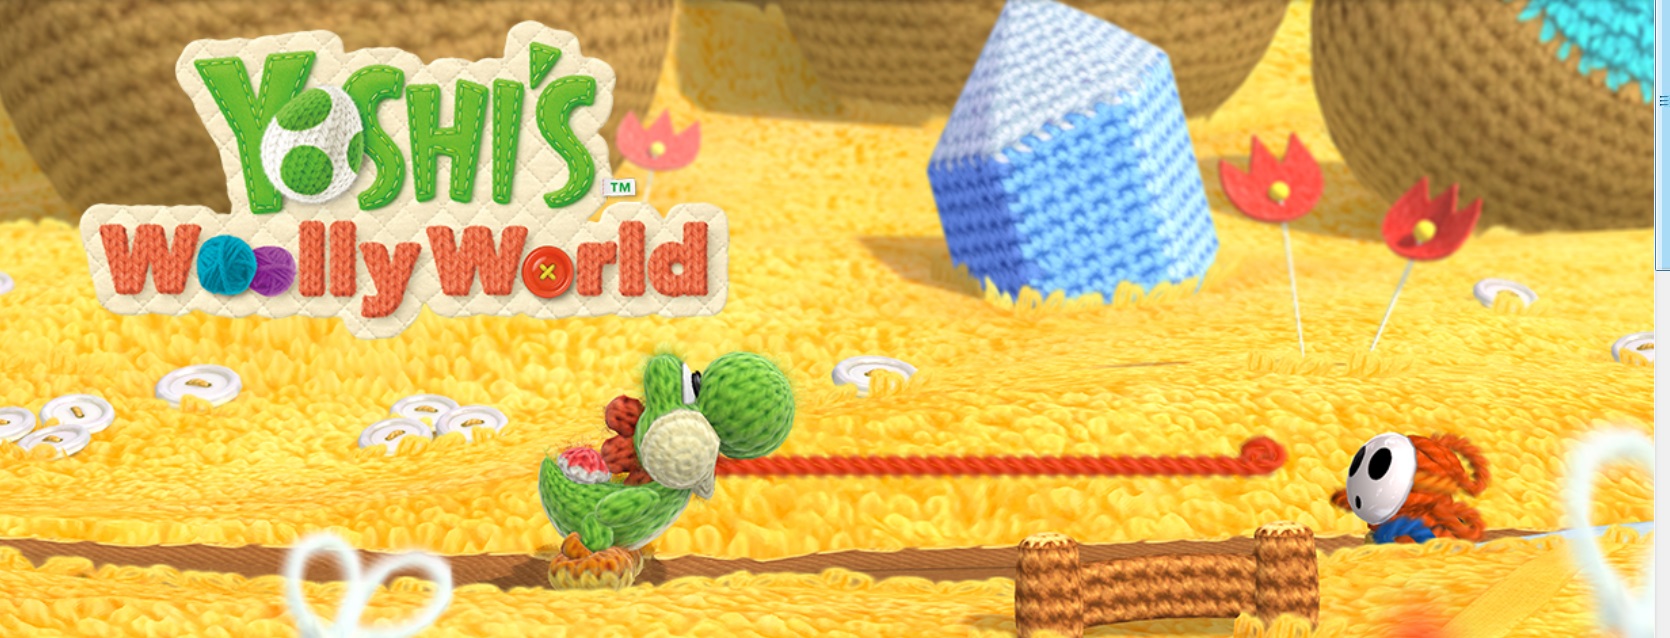 yoshis-woolly-world-artwork-banner-official[1]